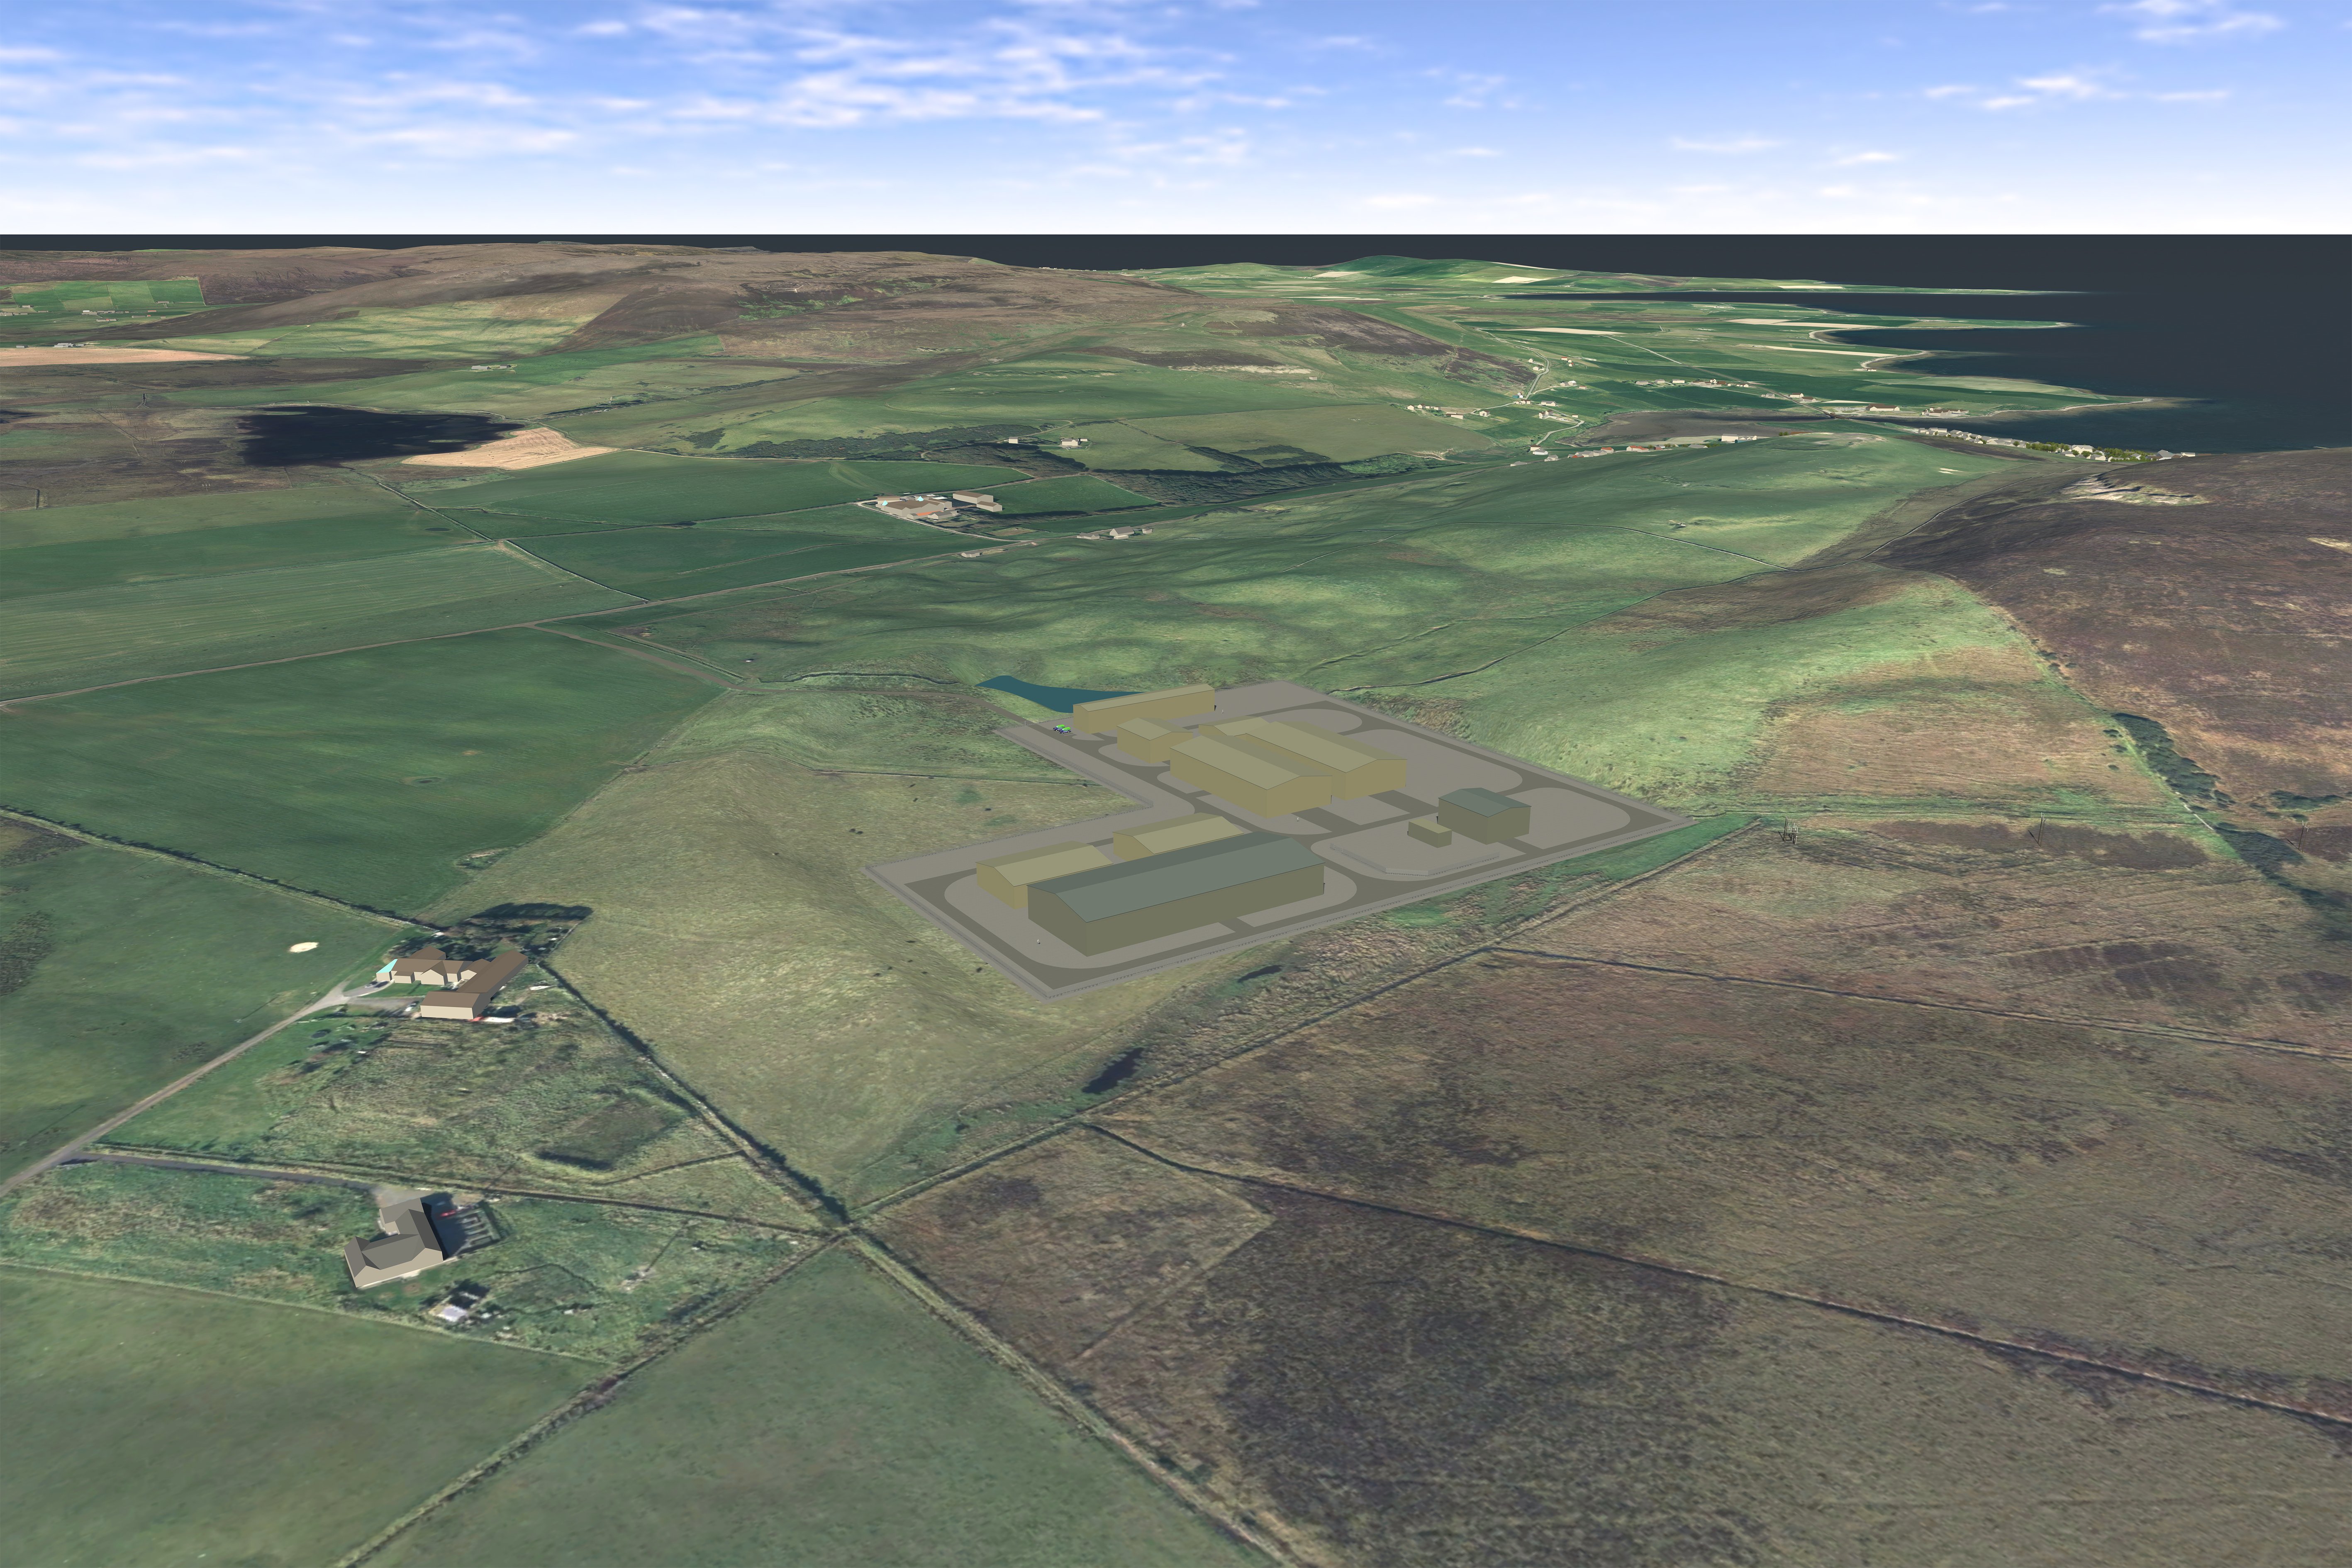 sse-lt17-finstown-aerial-view-for-exhib-06-02-19-proposed.jpg